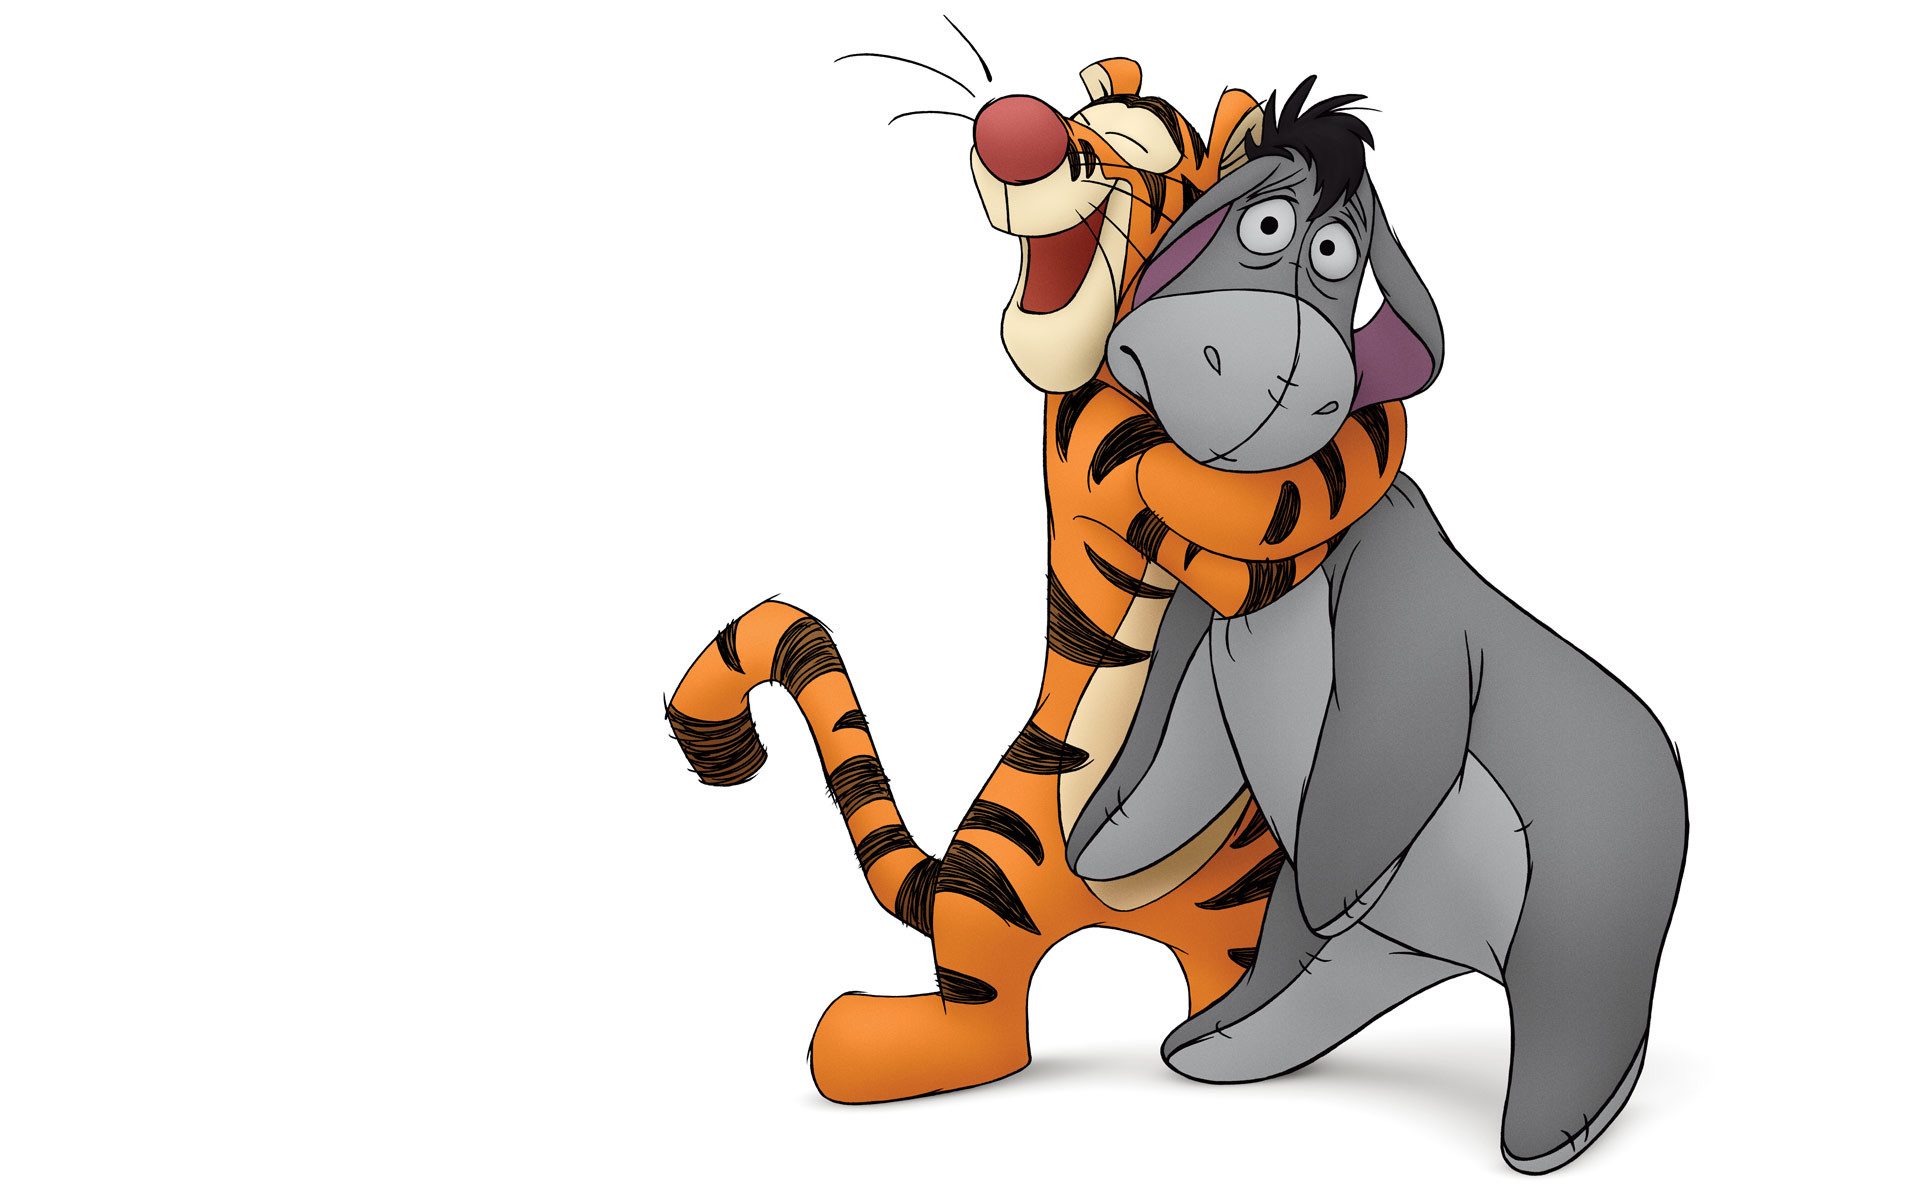 Tigger And Eeyore From Winnie The Pooh Wallpaper - Winnie The Pooh Eeyore And Tiger - HD Wallpaper 